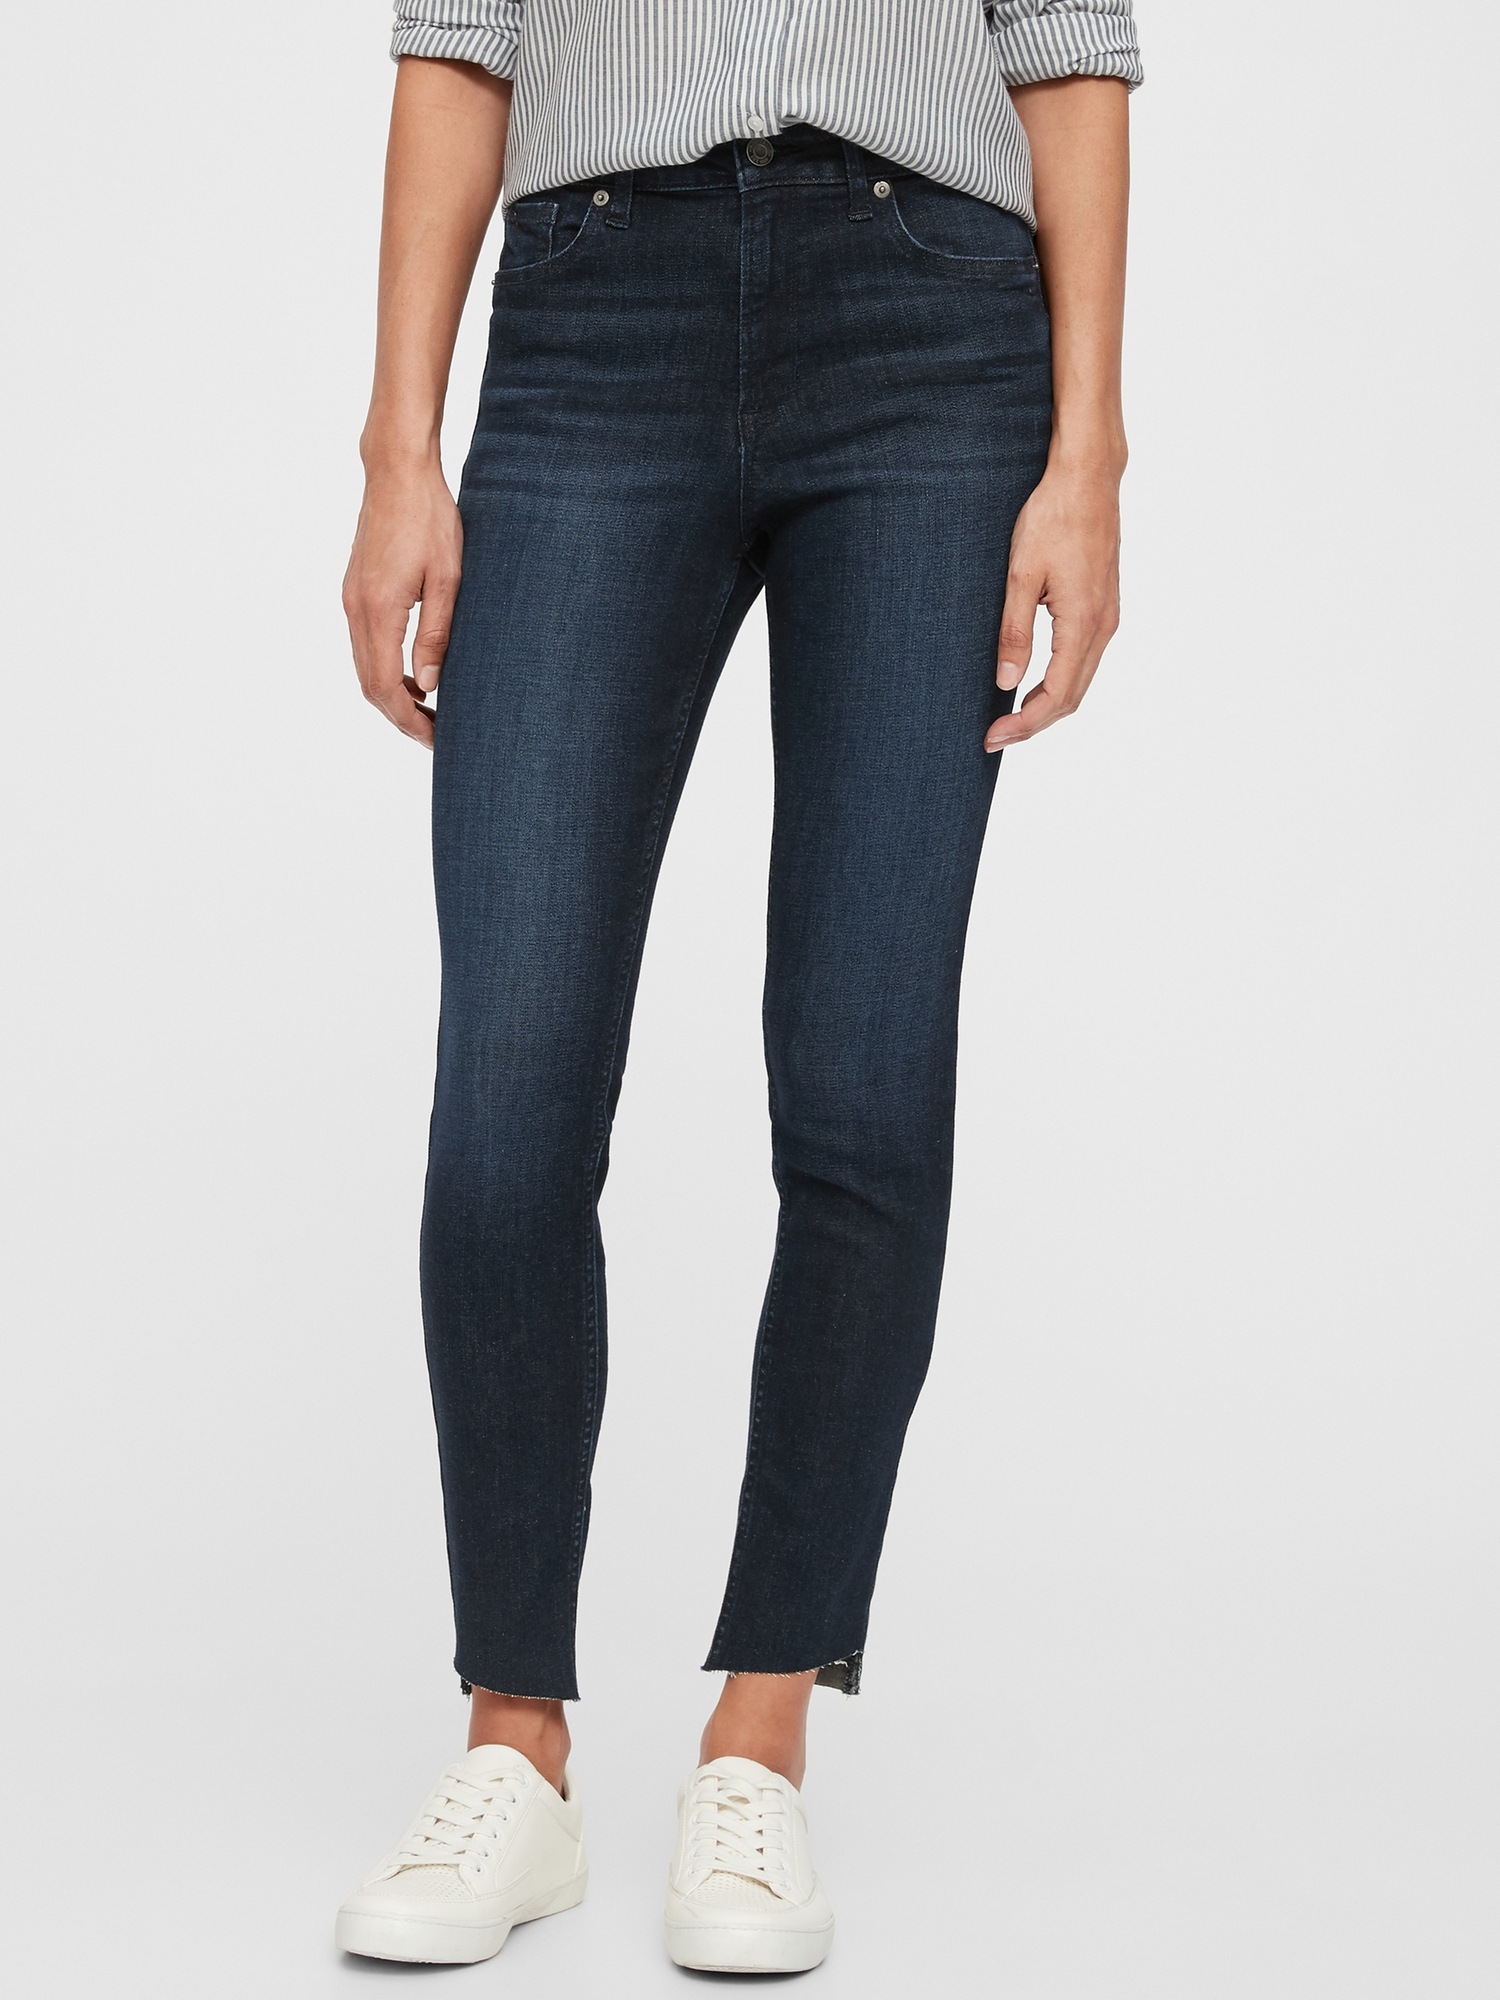 Gap Factory Women's High Rise Universal Legging Jeans with Washwell